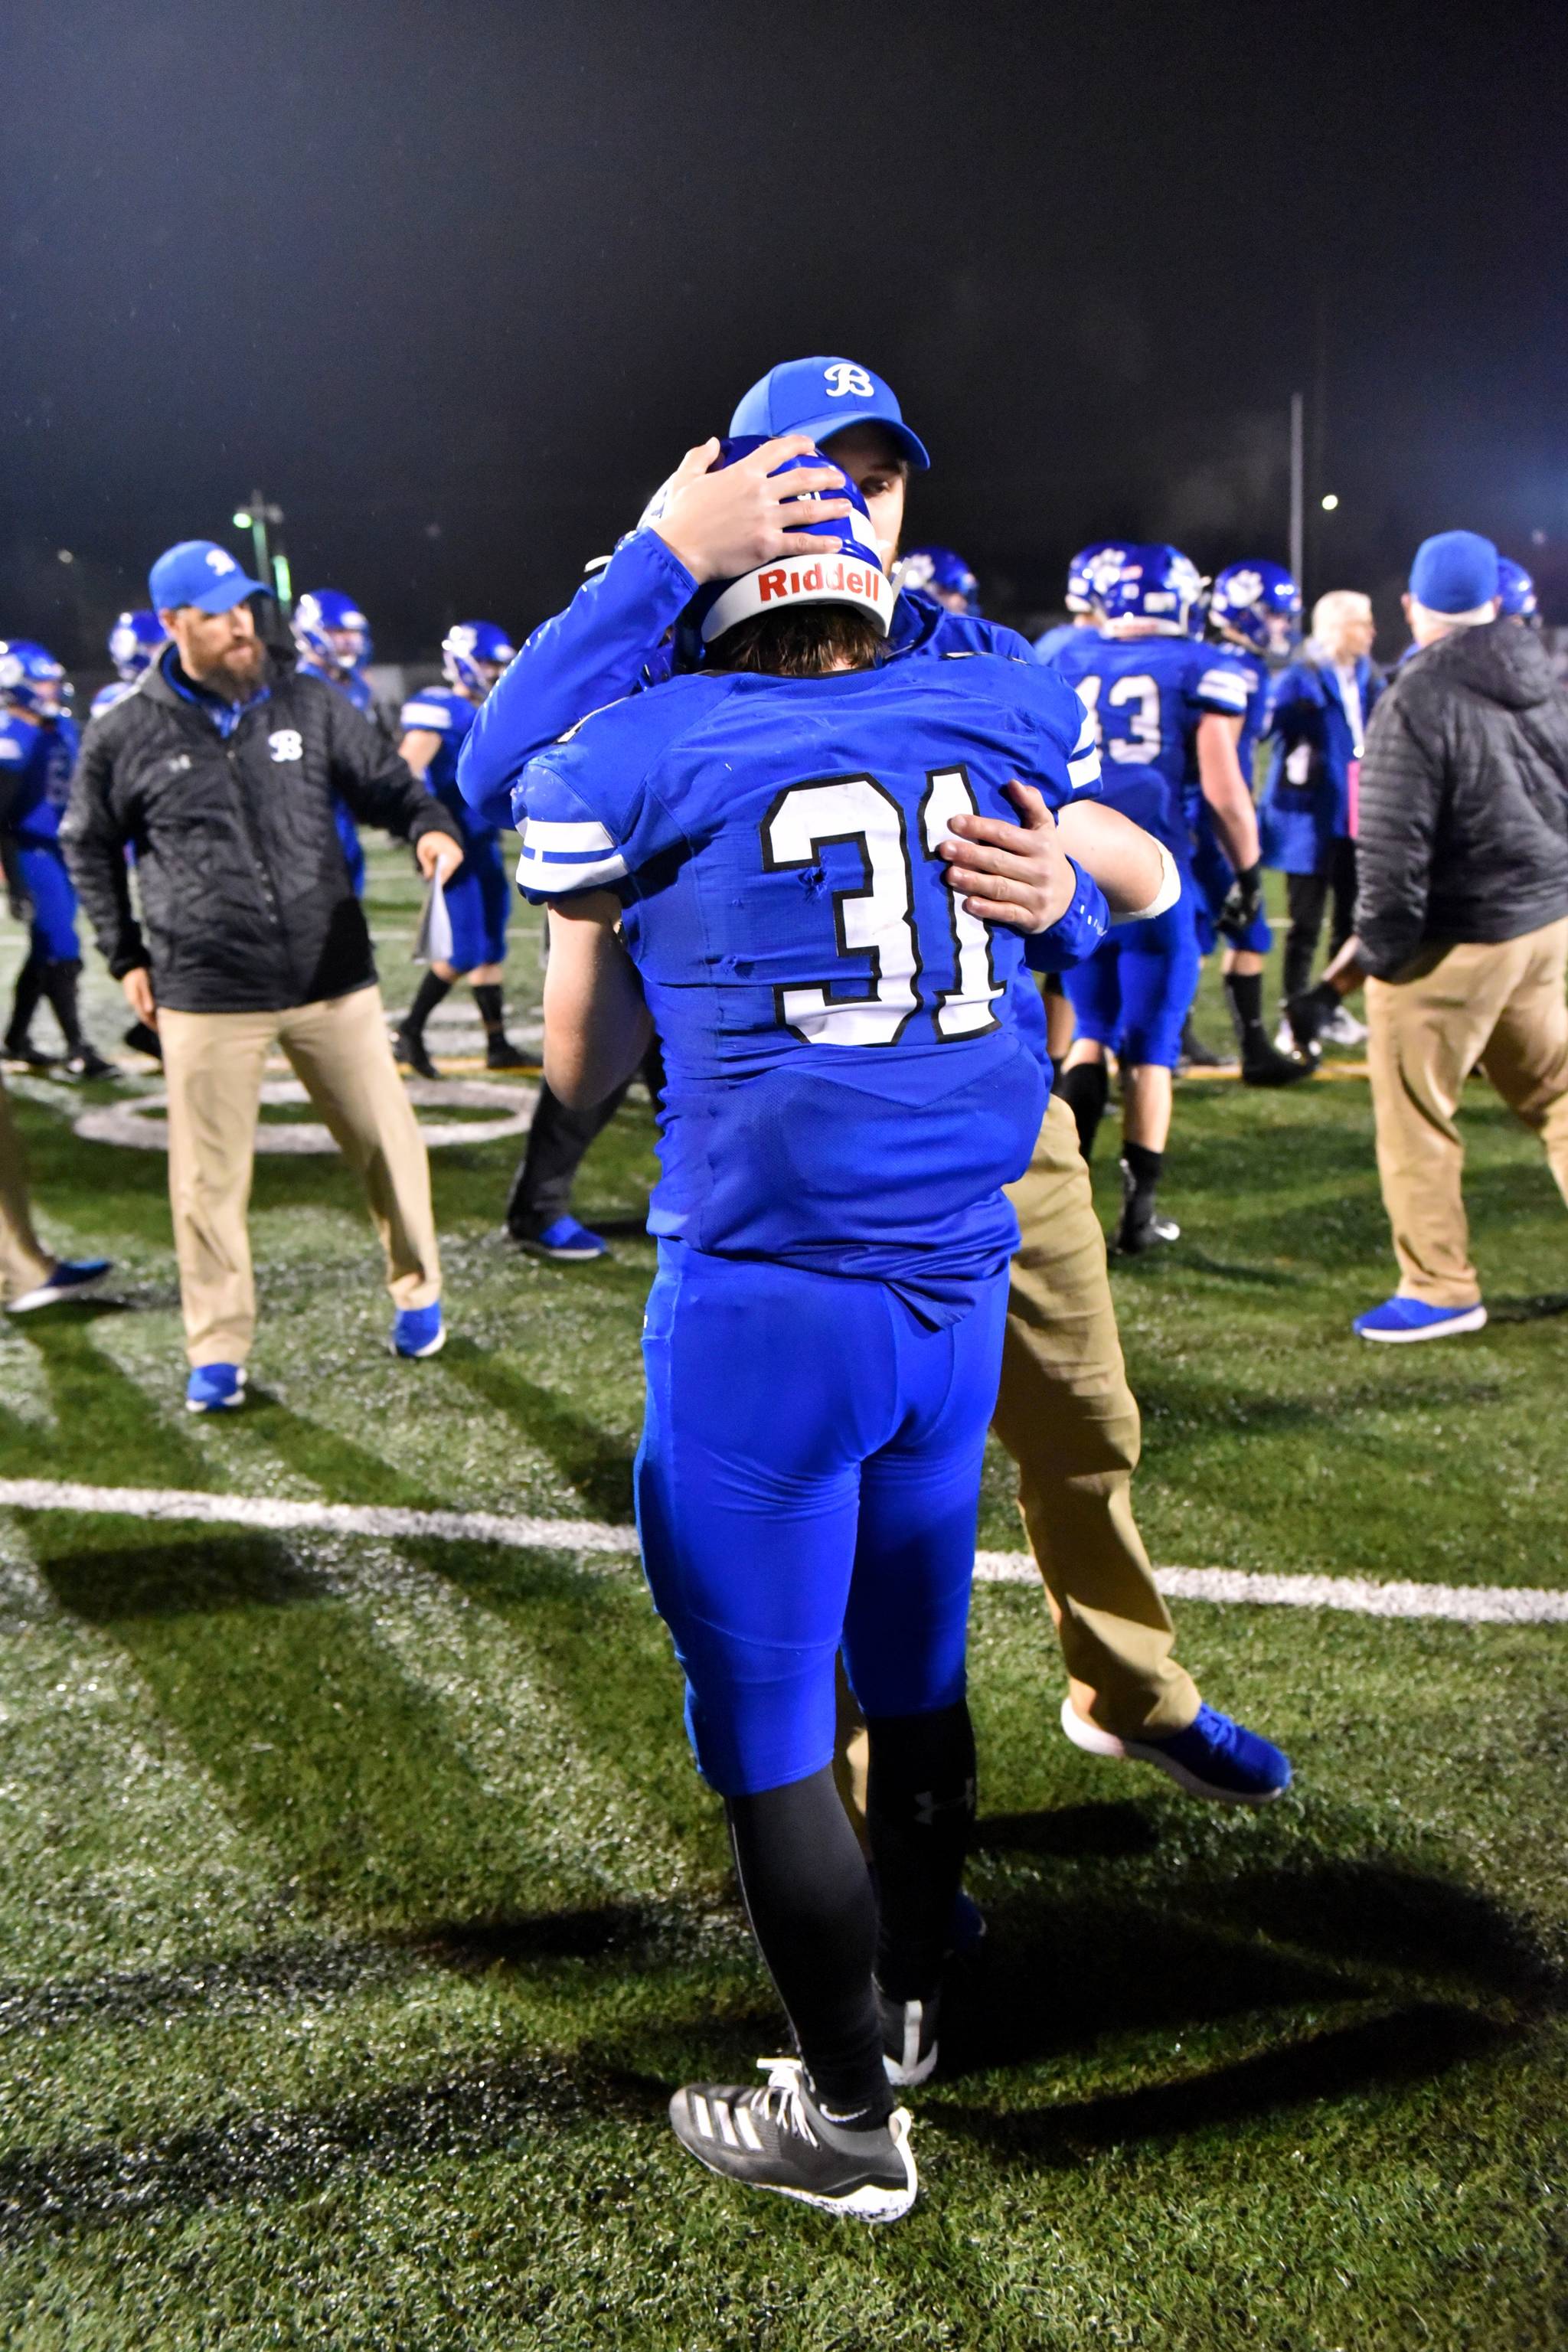 Ryan Metz receives a hug following the state championship game. Photo courtesy of Greg Nelson